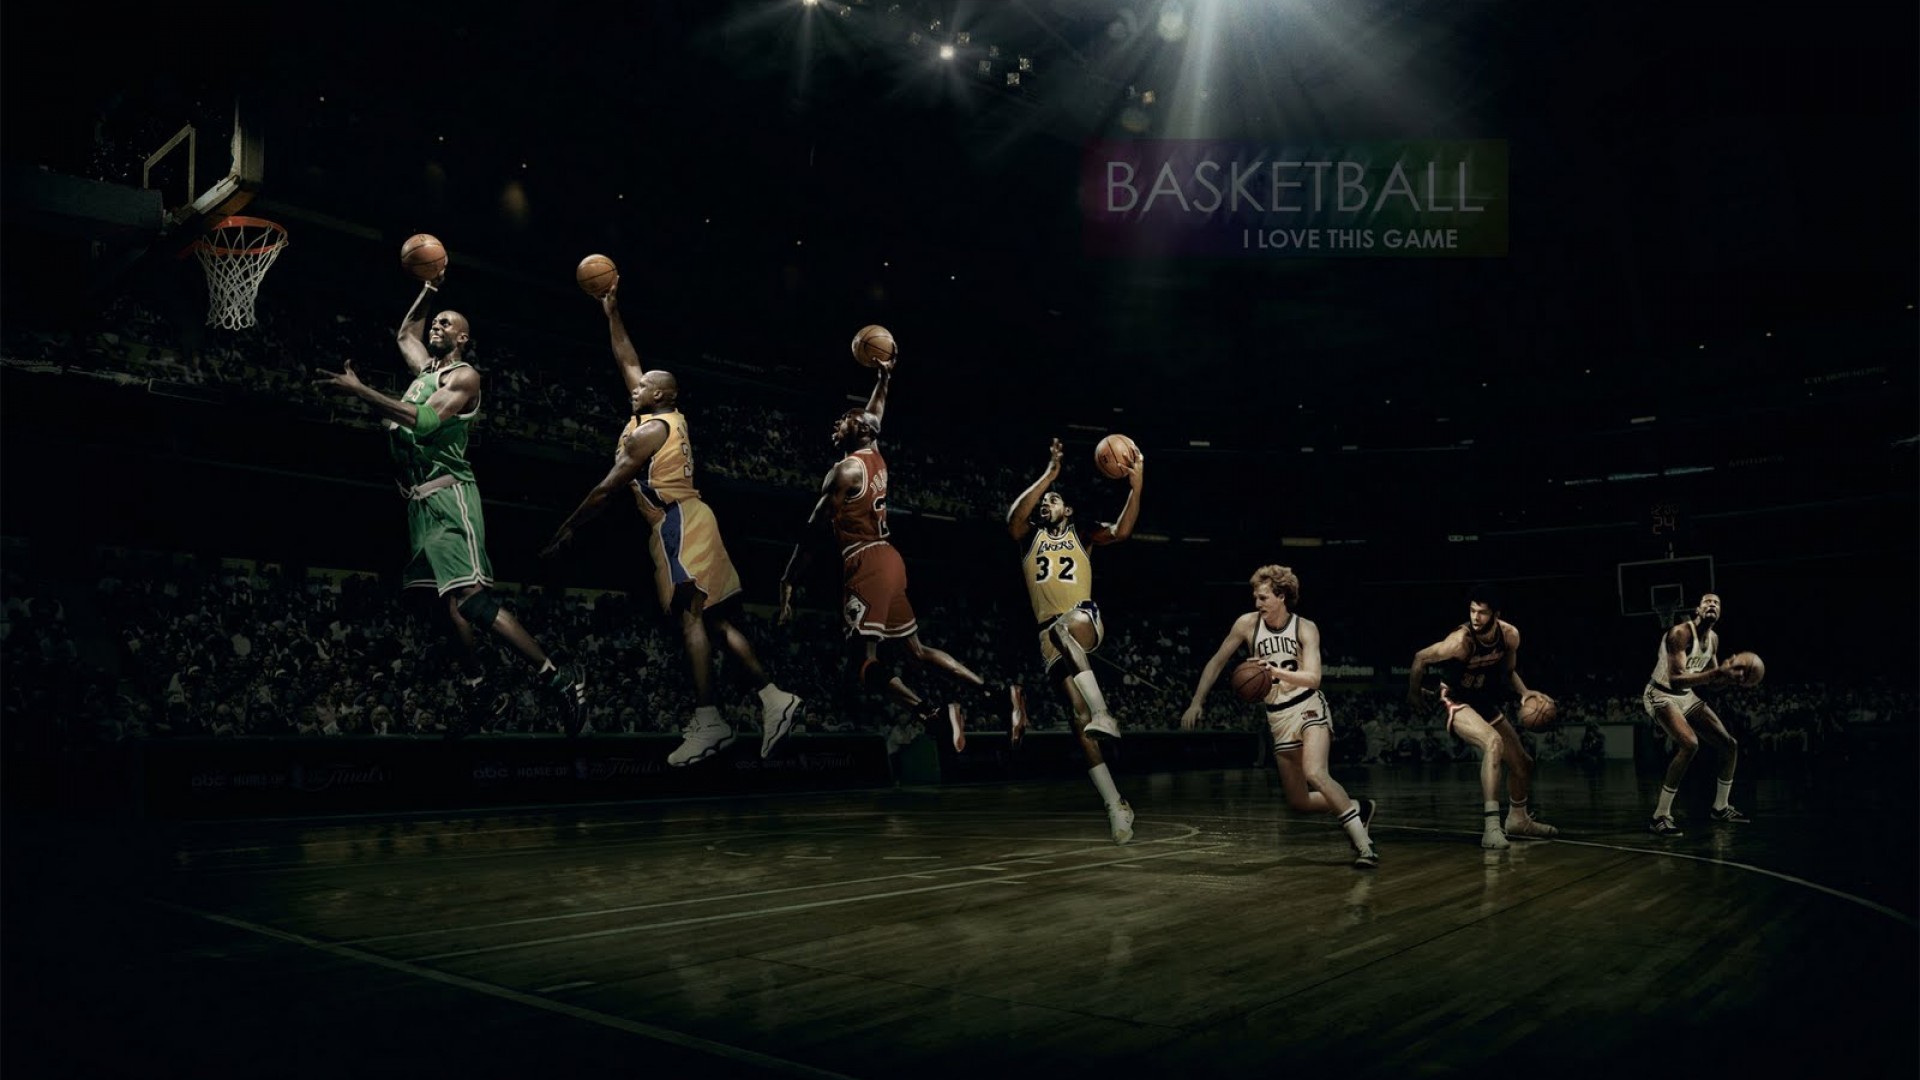 1920x1080 Basketball Wallpapers Pack Download V.97 - AHDzBooK Backgrounds